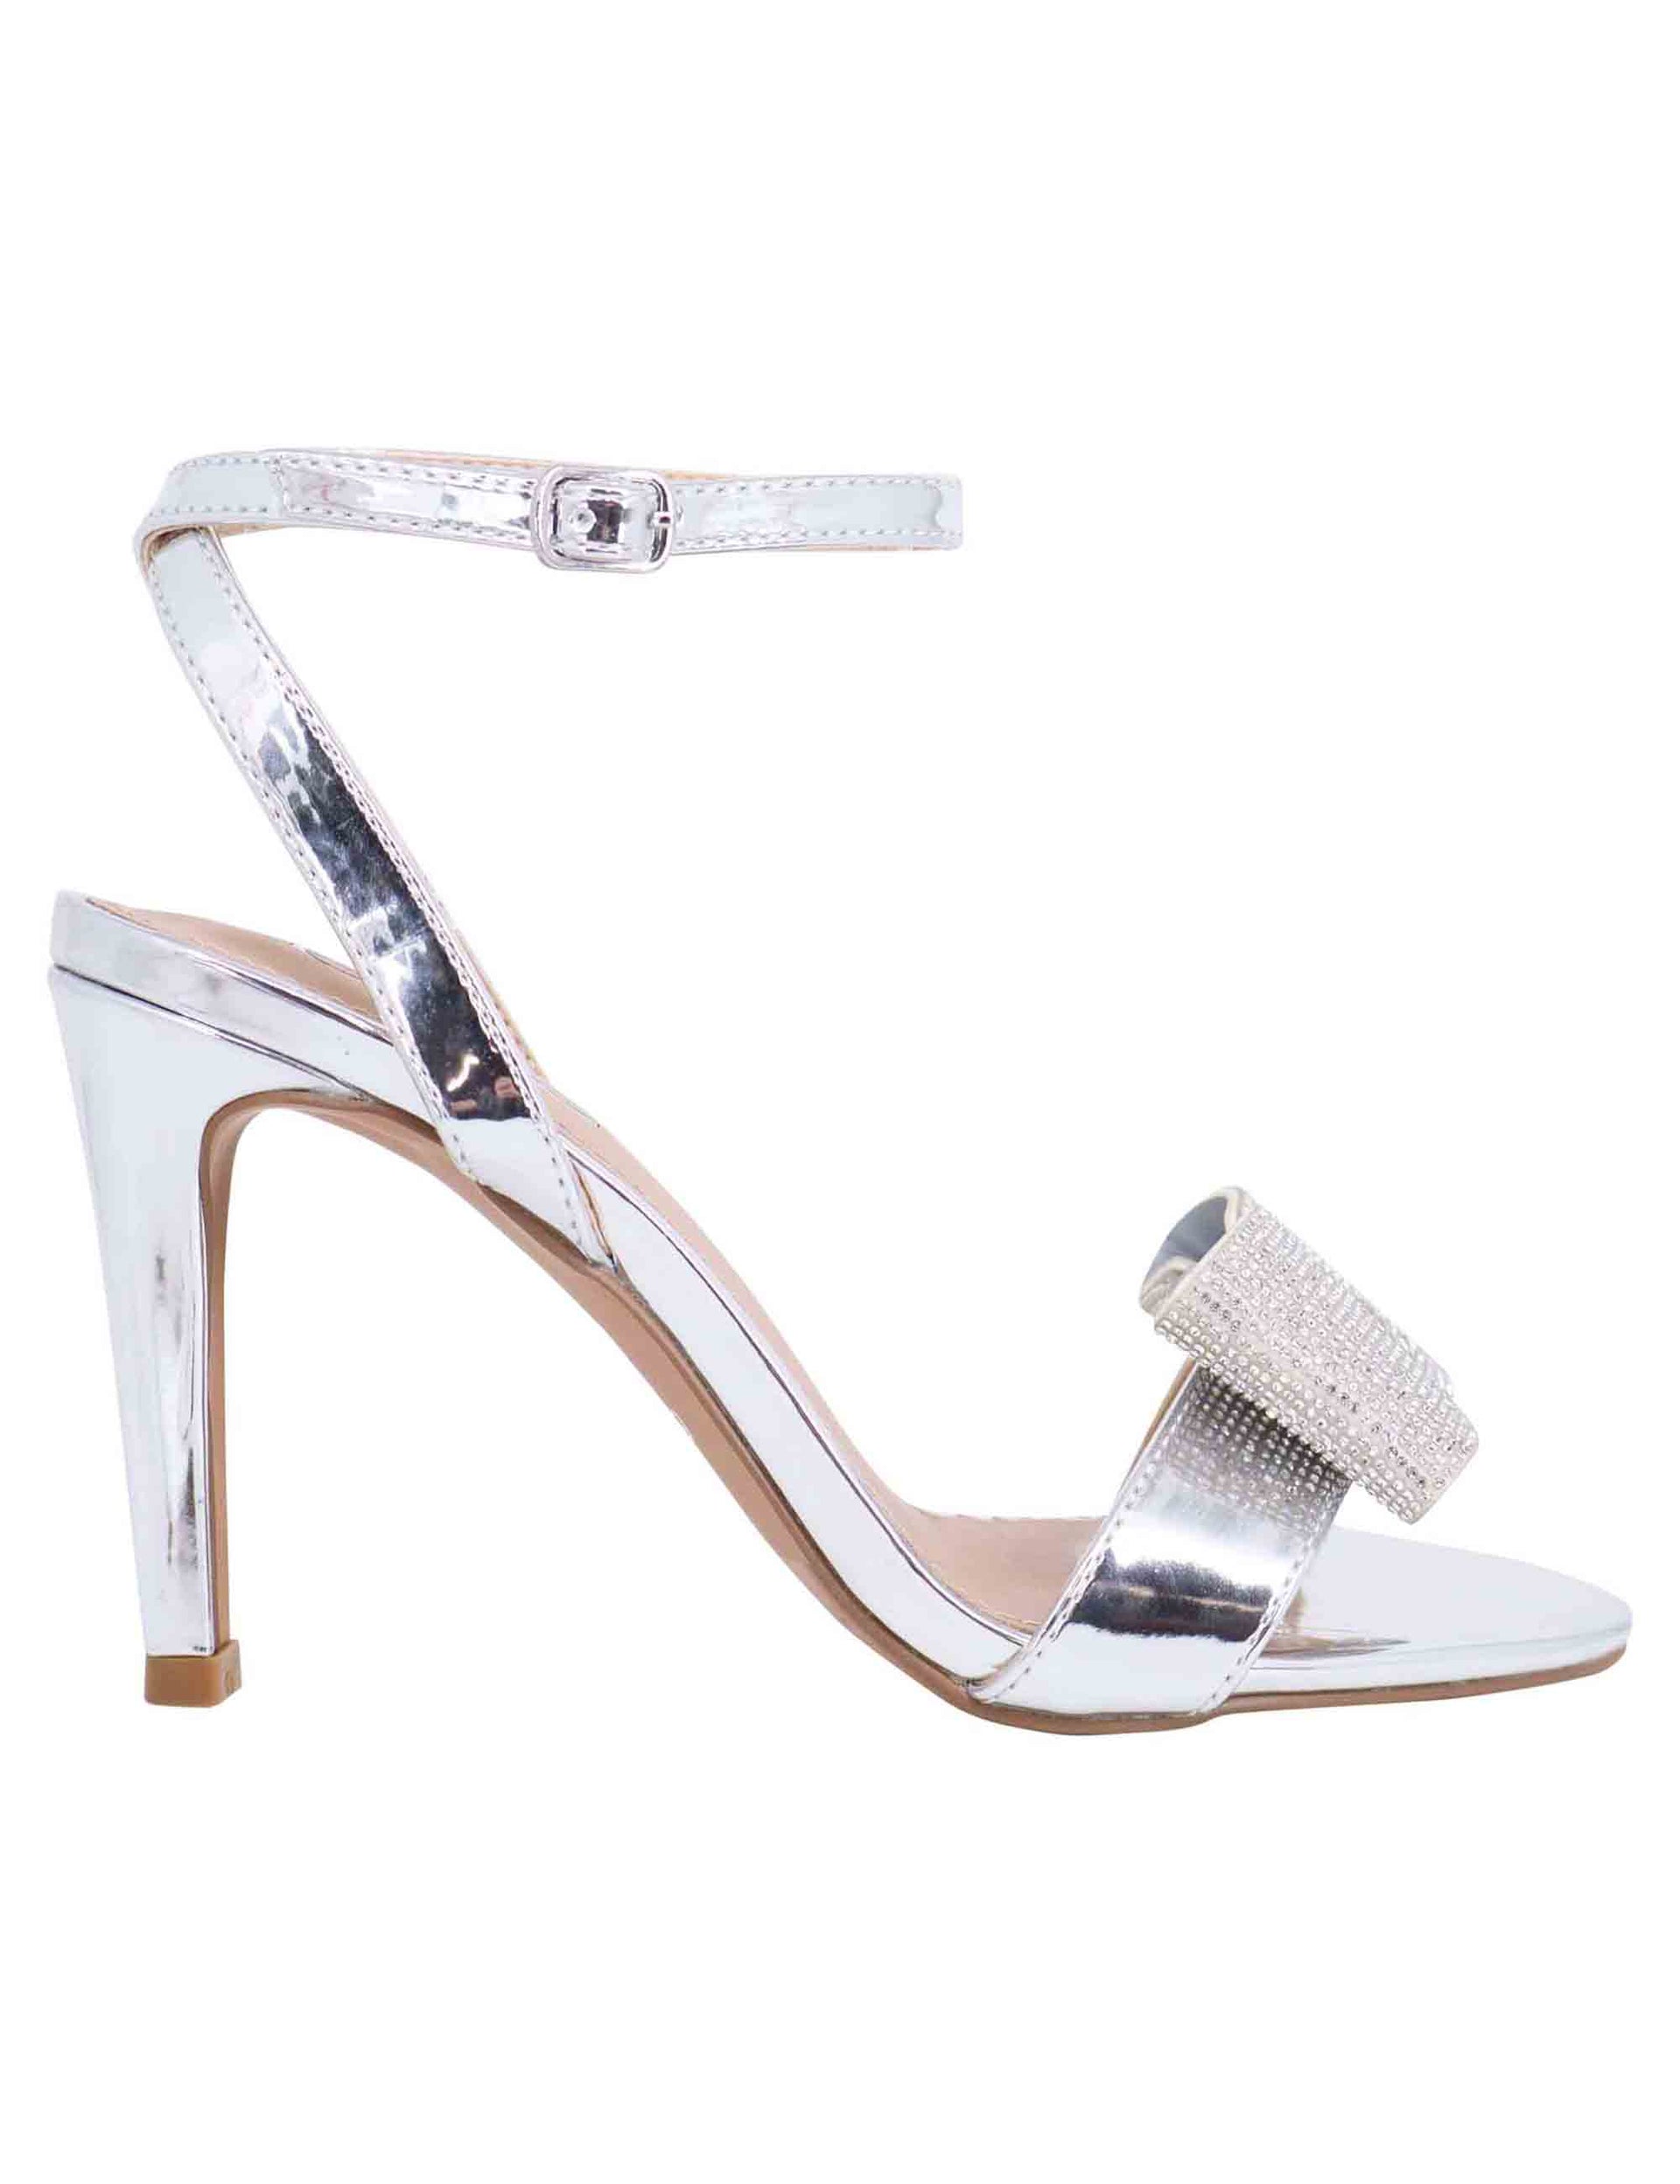 Women's sandals in silver laminated eco leather with high heel and rhinestones